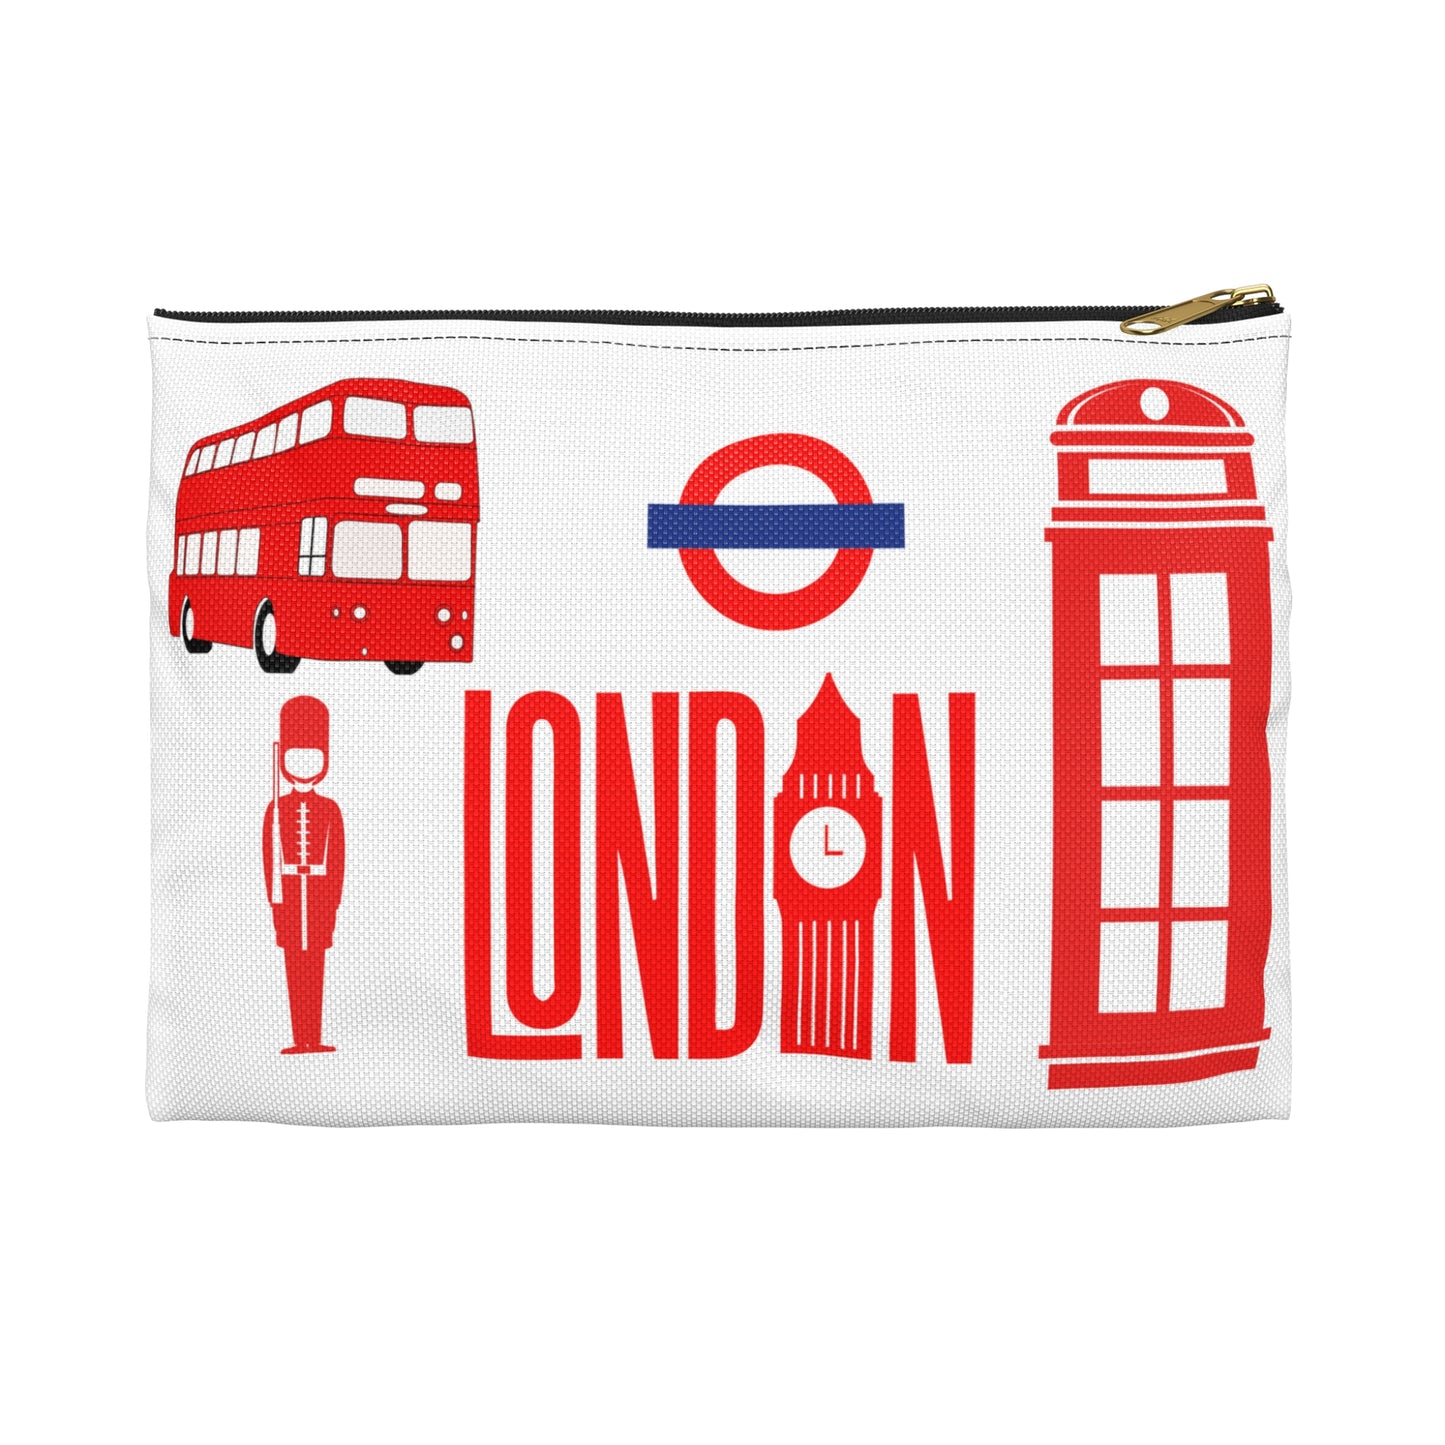 London Accessory Pouch, Phone Booth Bag